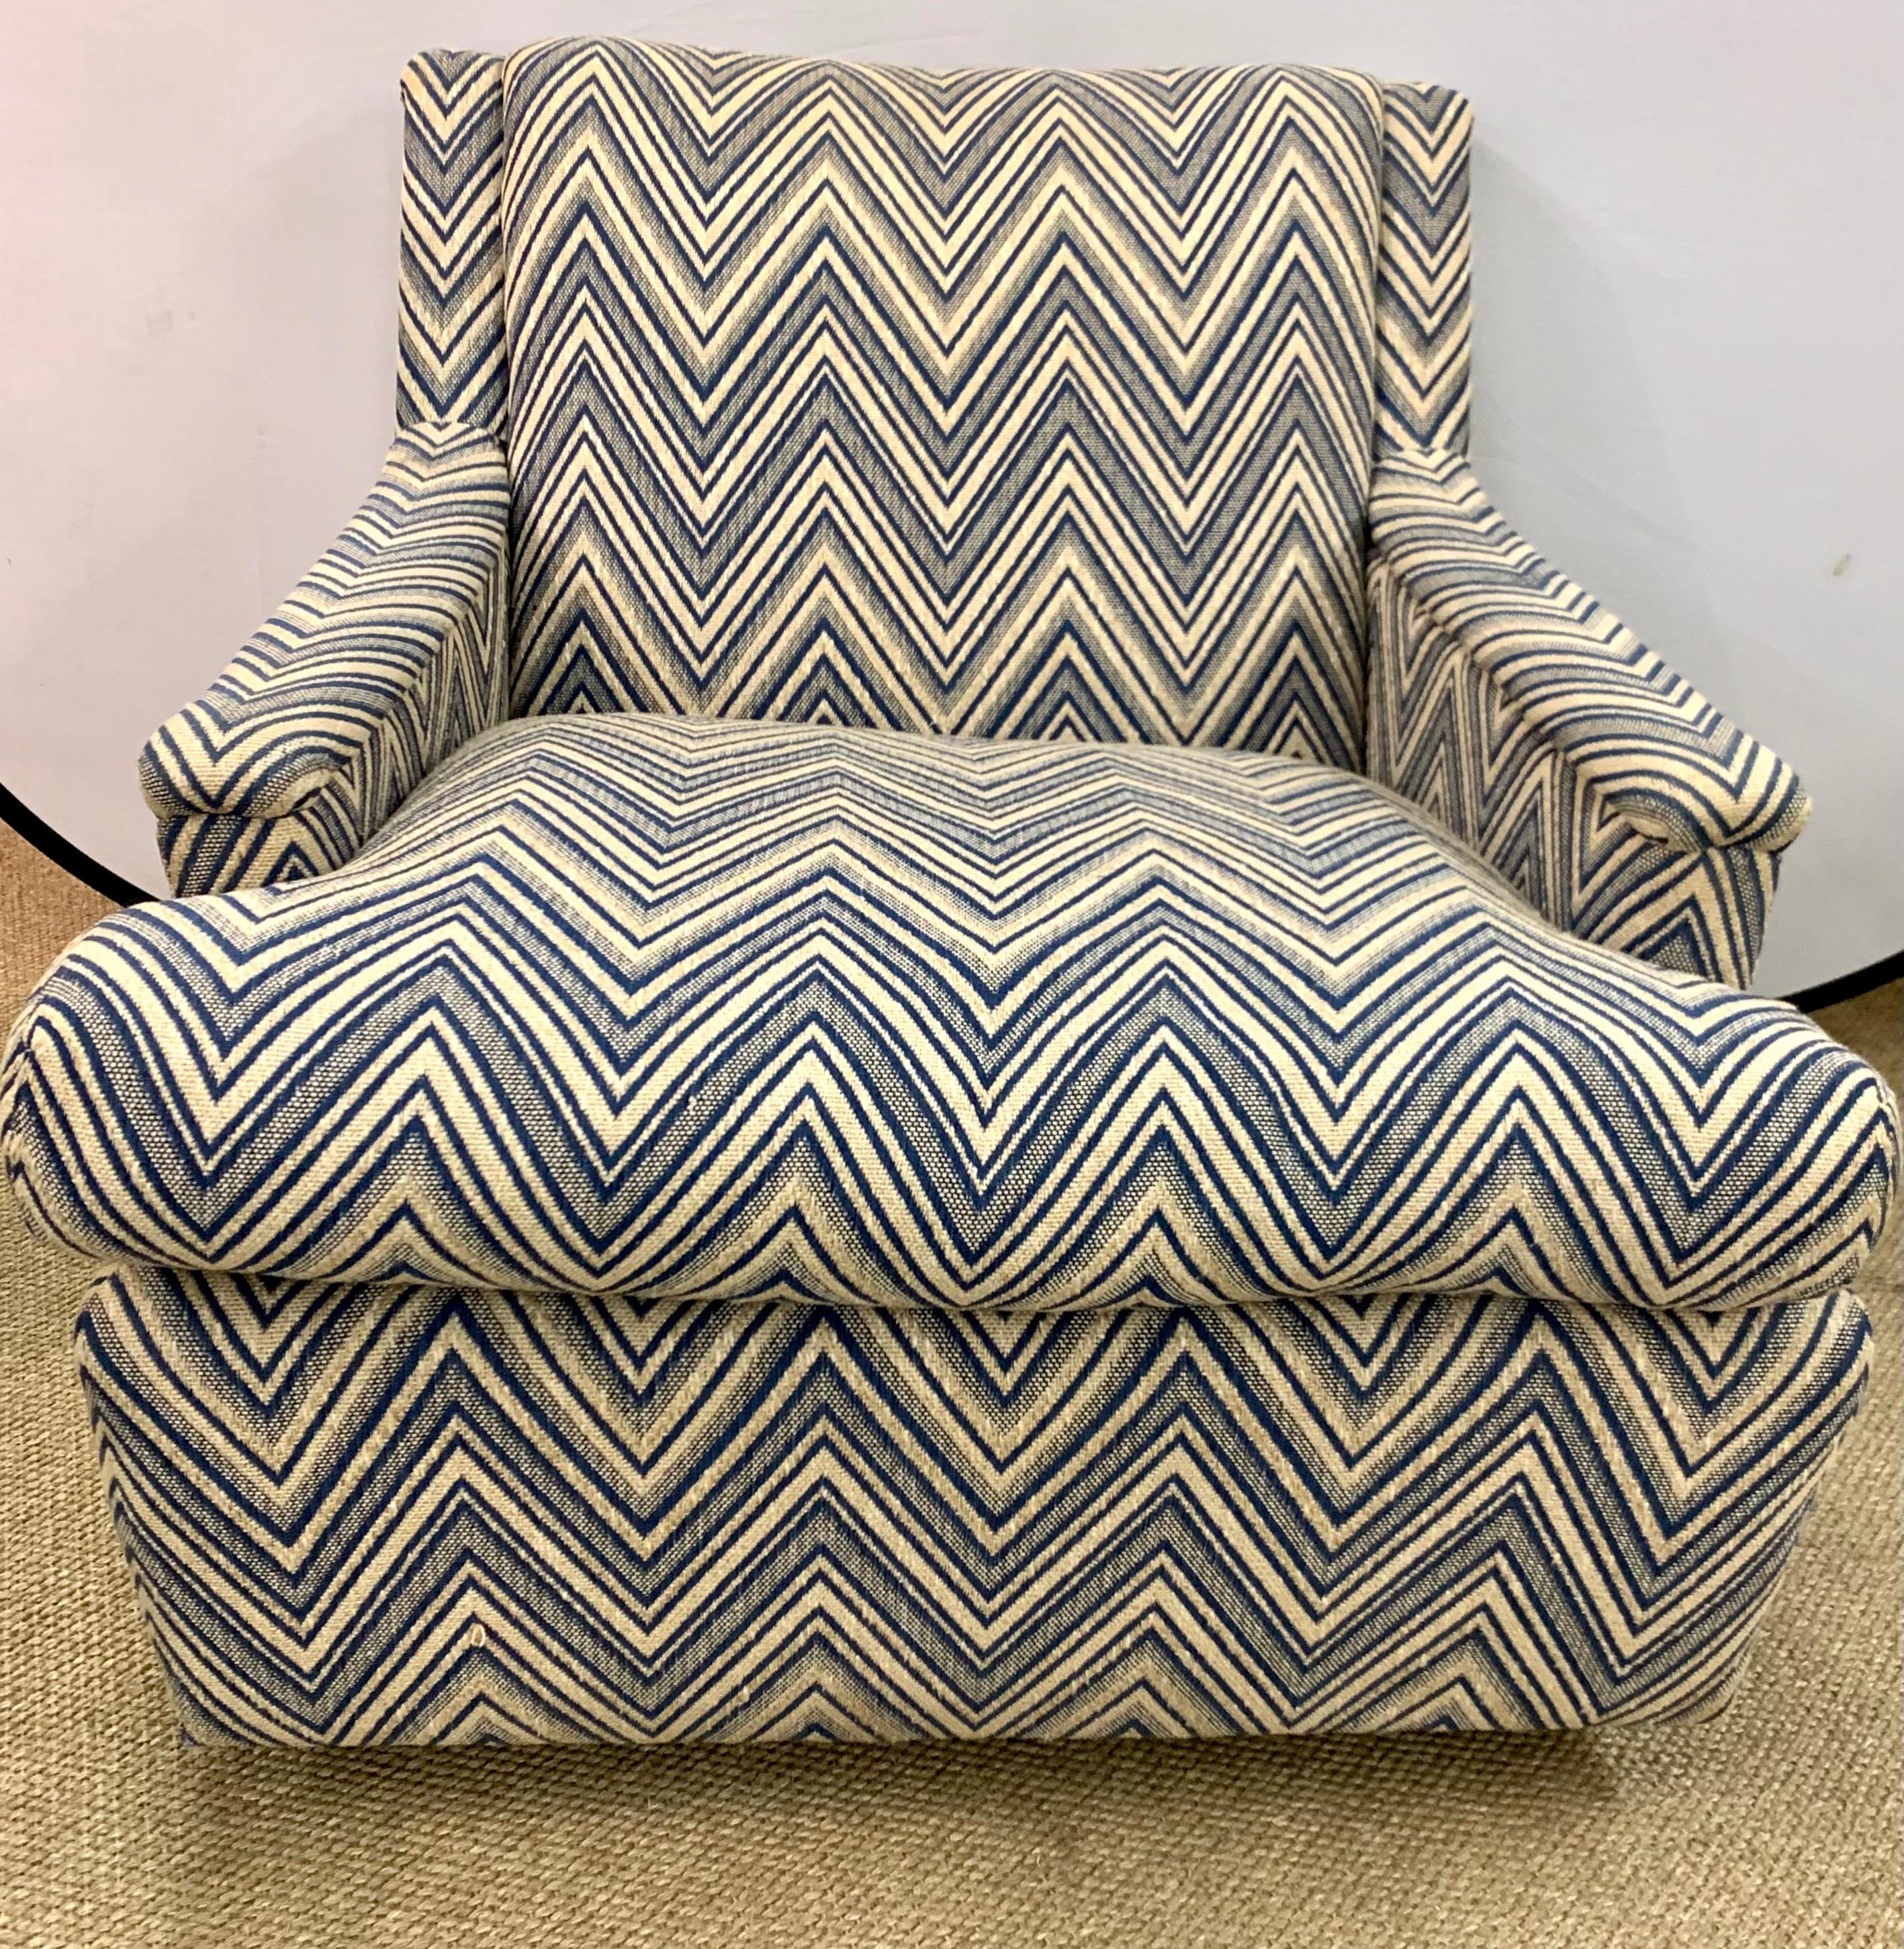 Newly upholstered in a tan and blue chevron fabric is this Mid-Century Modern arm chair. All dimensions are below. One of the most comfortable chairs we've ever sat in. Fully refurbished. Now, more than ever, home is where the heart is.